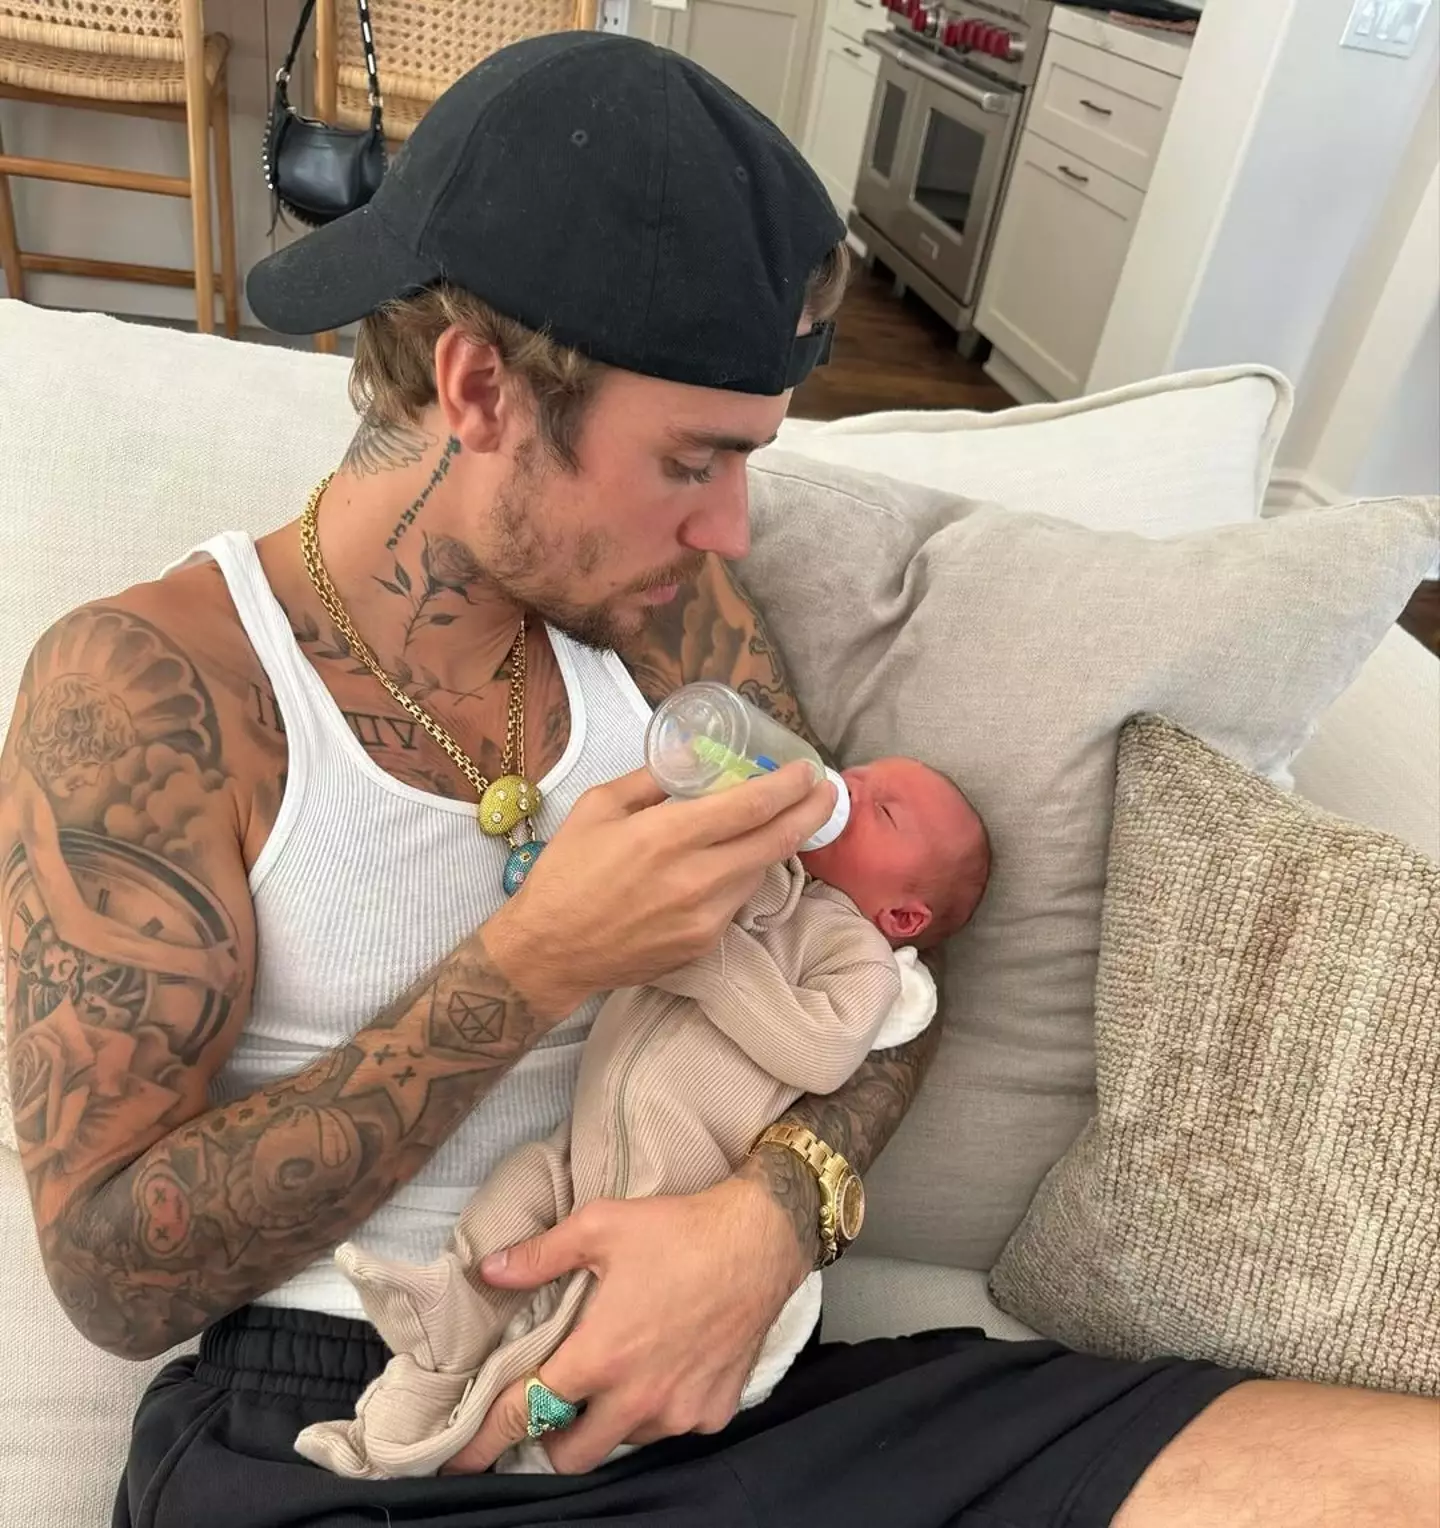 Justin Bieber took to Instagram to share two pictures cradling a newborn baby.